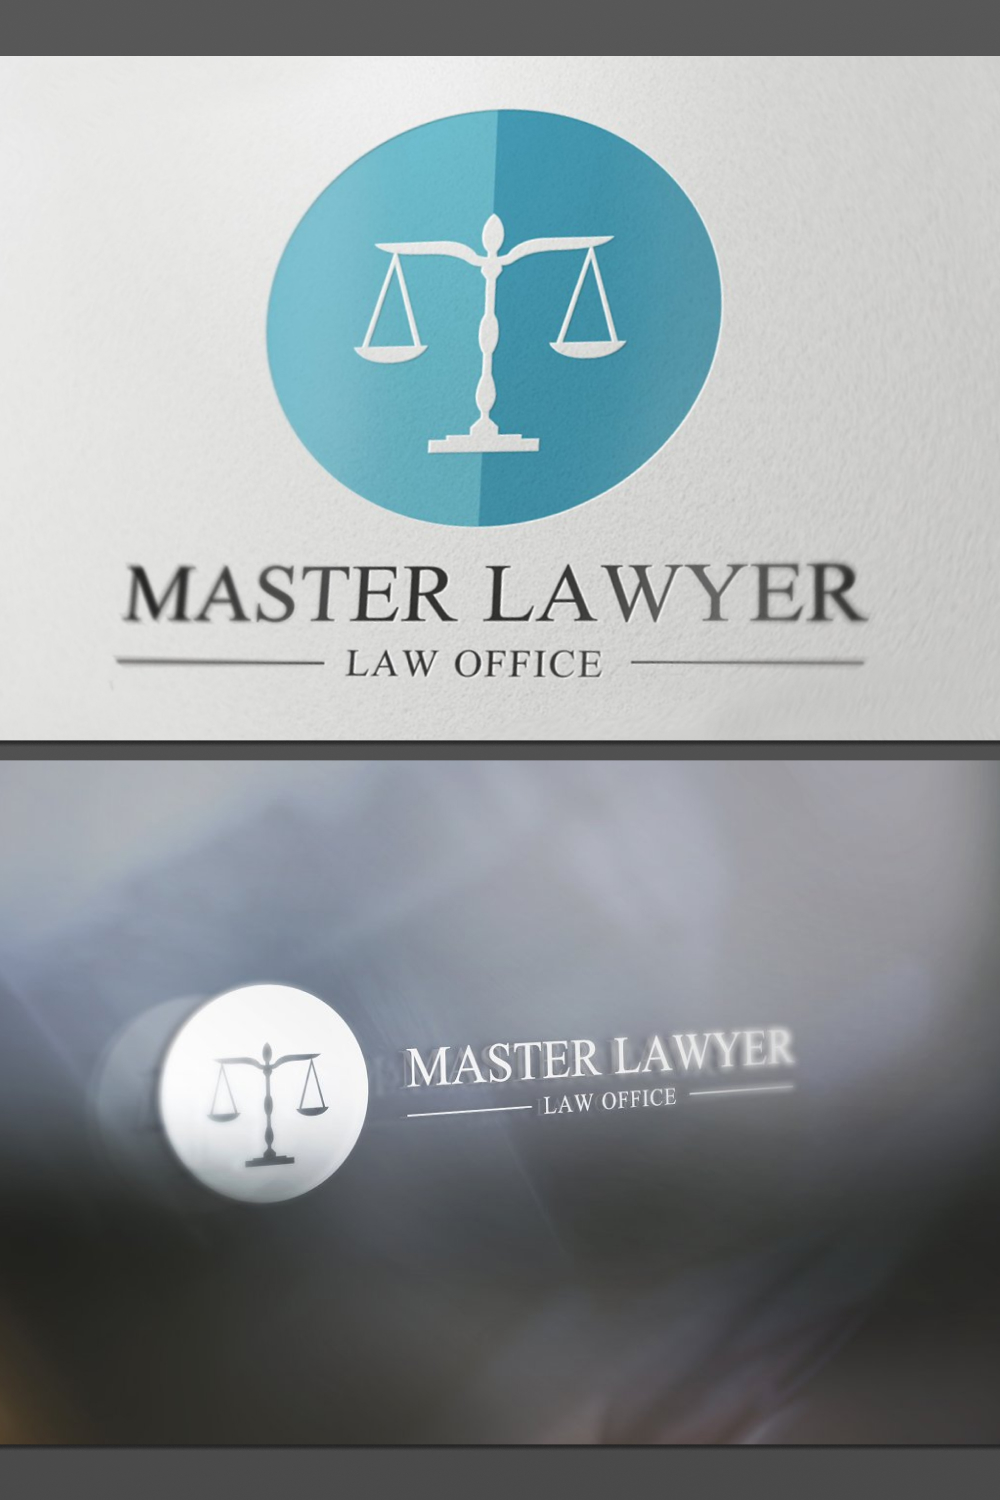 law firm logo template design.